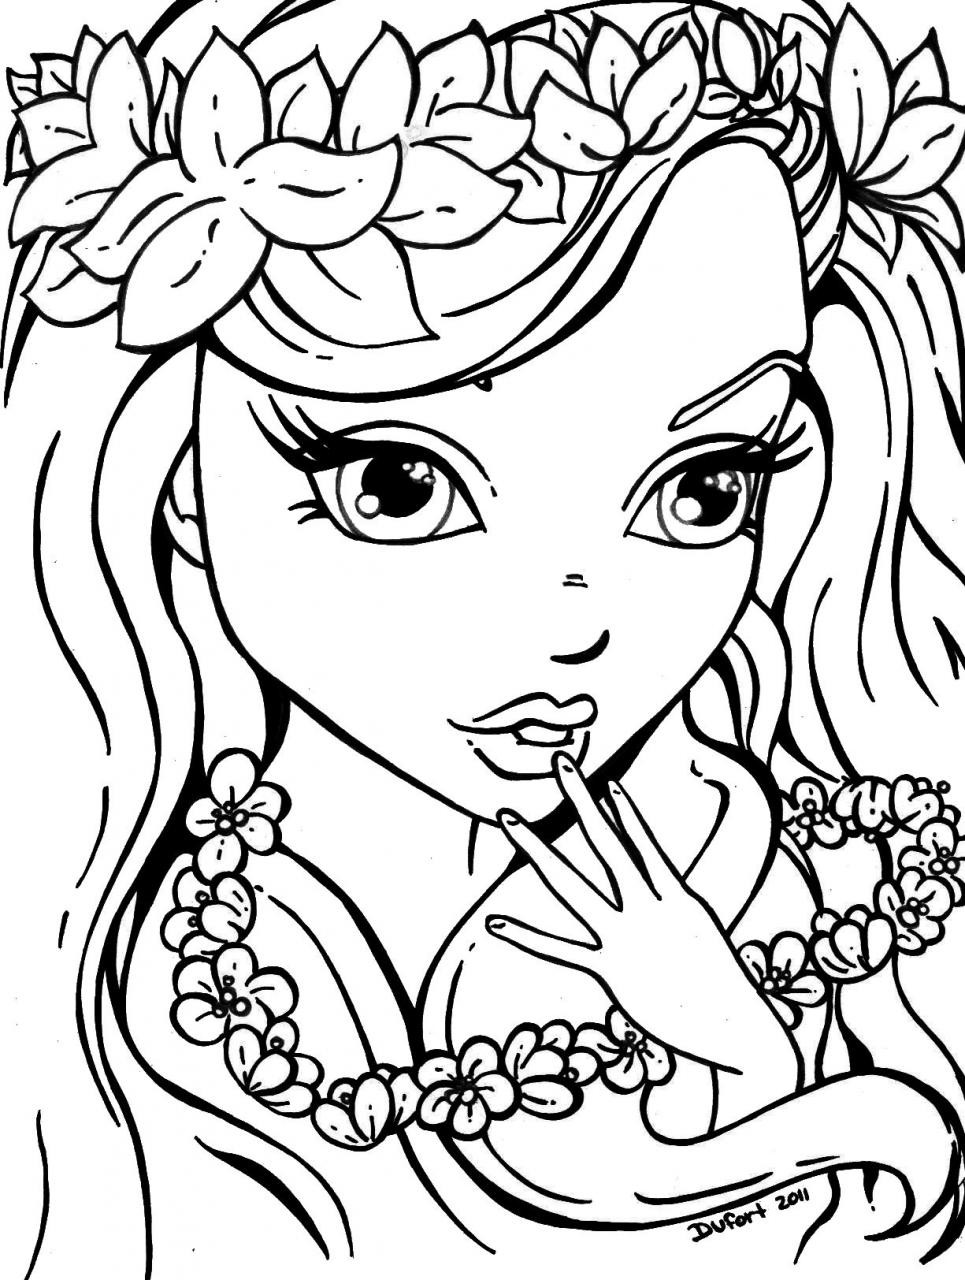 Girls Coloring Pages
 Coloring Pages for Girls Best Coloring Pages For Kids